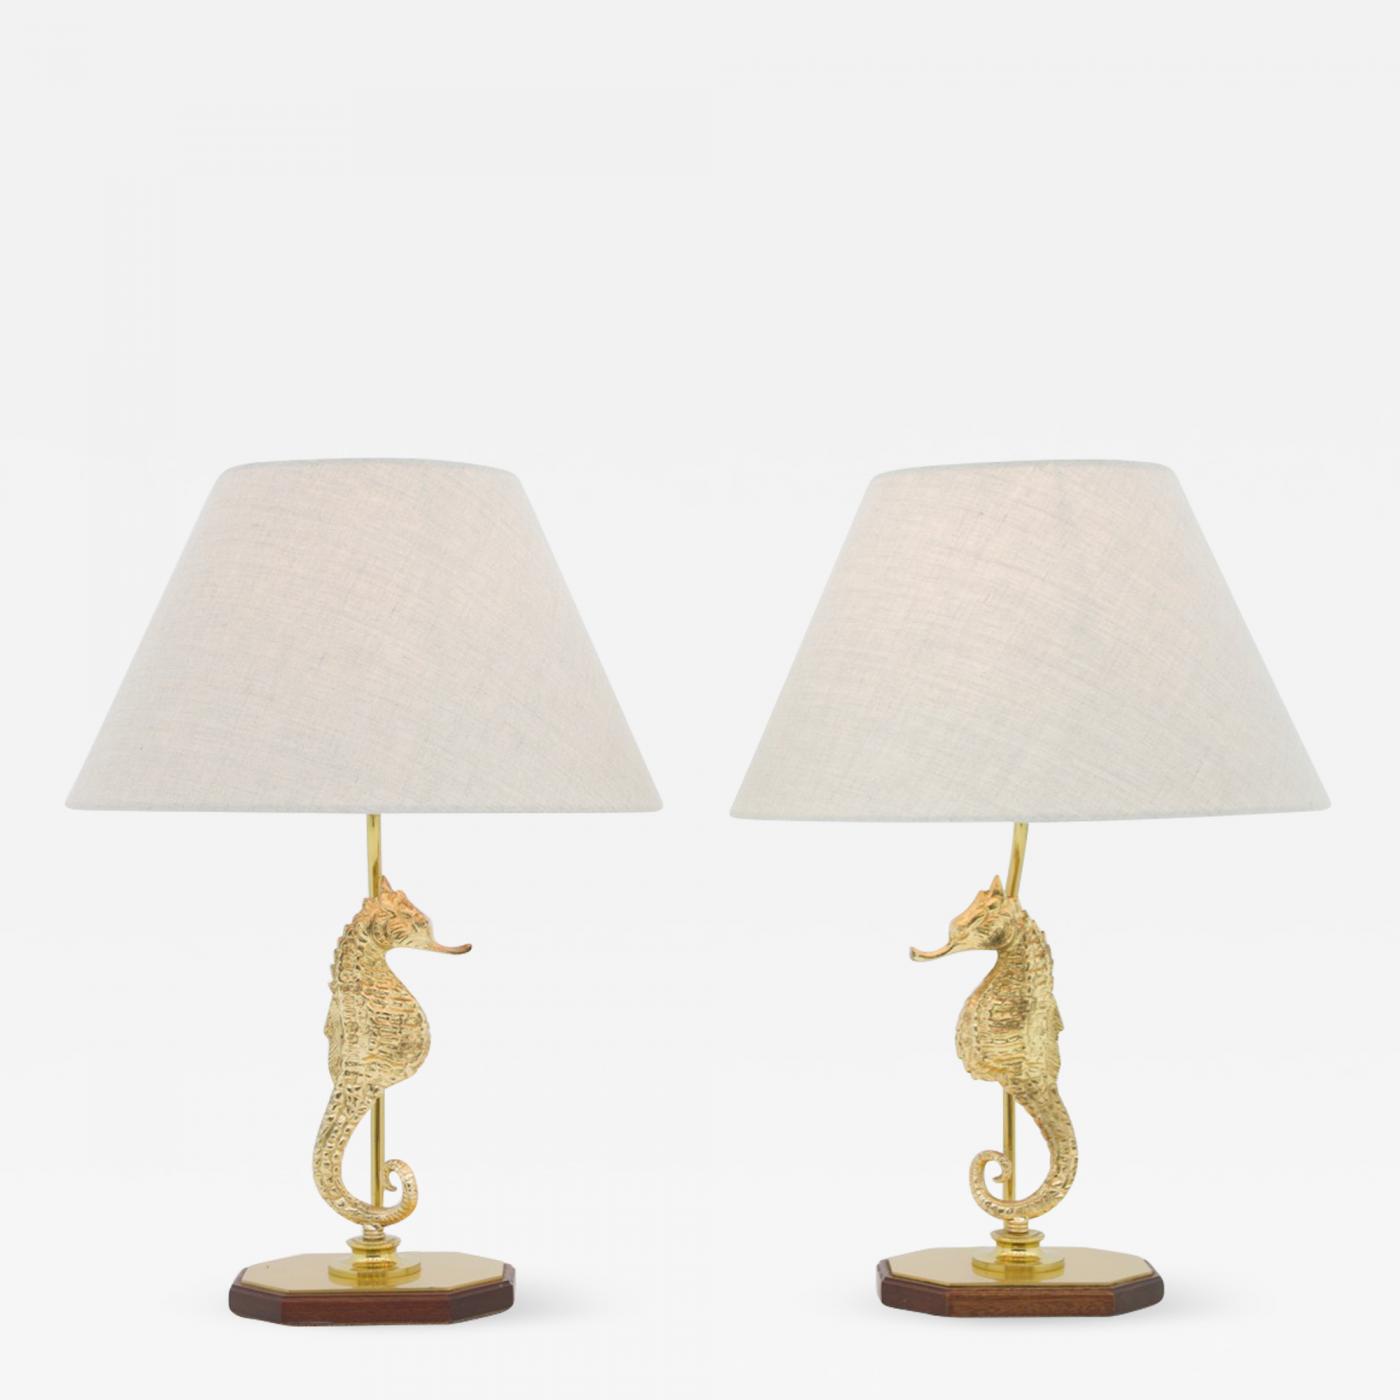 Pair Of Brass And Wood Seahorse Table Lamps, Silver Seahorse Table Lamp